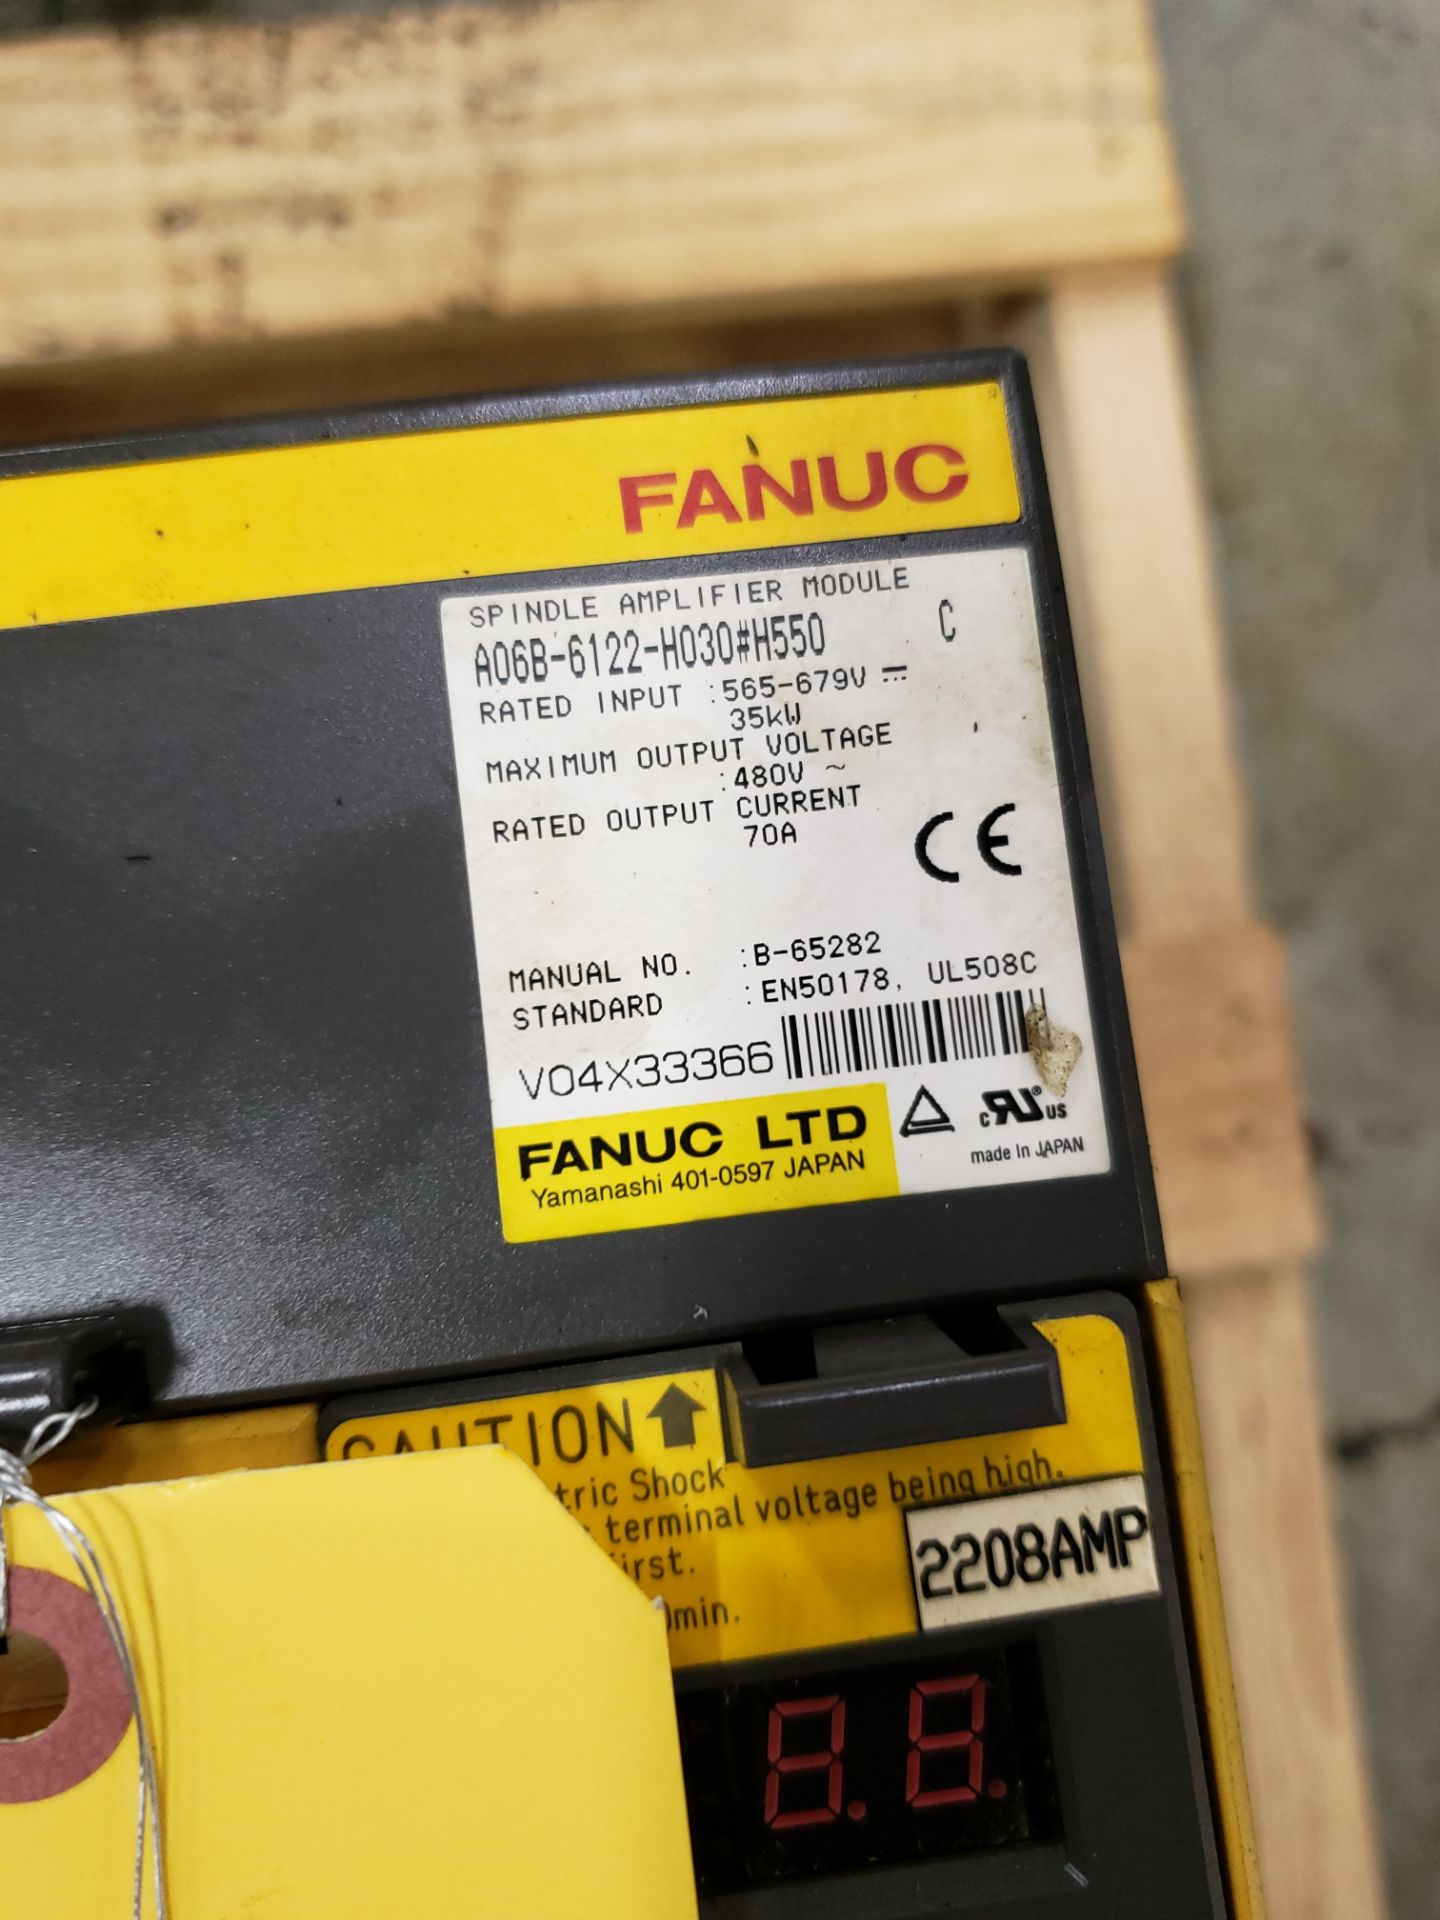 FANUC SPINDLE AMPLIFIER MODULE MODEL-A06B-6121-H030 #550 480V(LOCATED AT: 131 W. HARVEST STREET, - Image 2 of 2